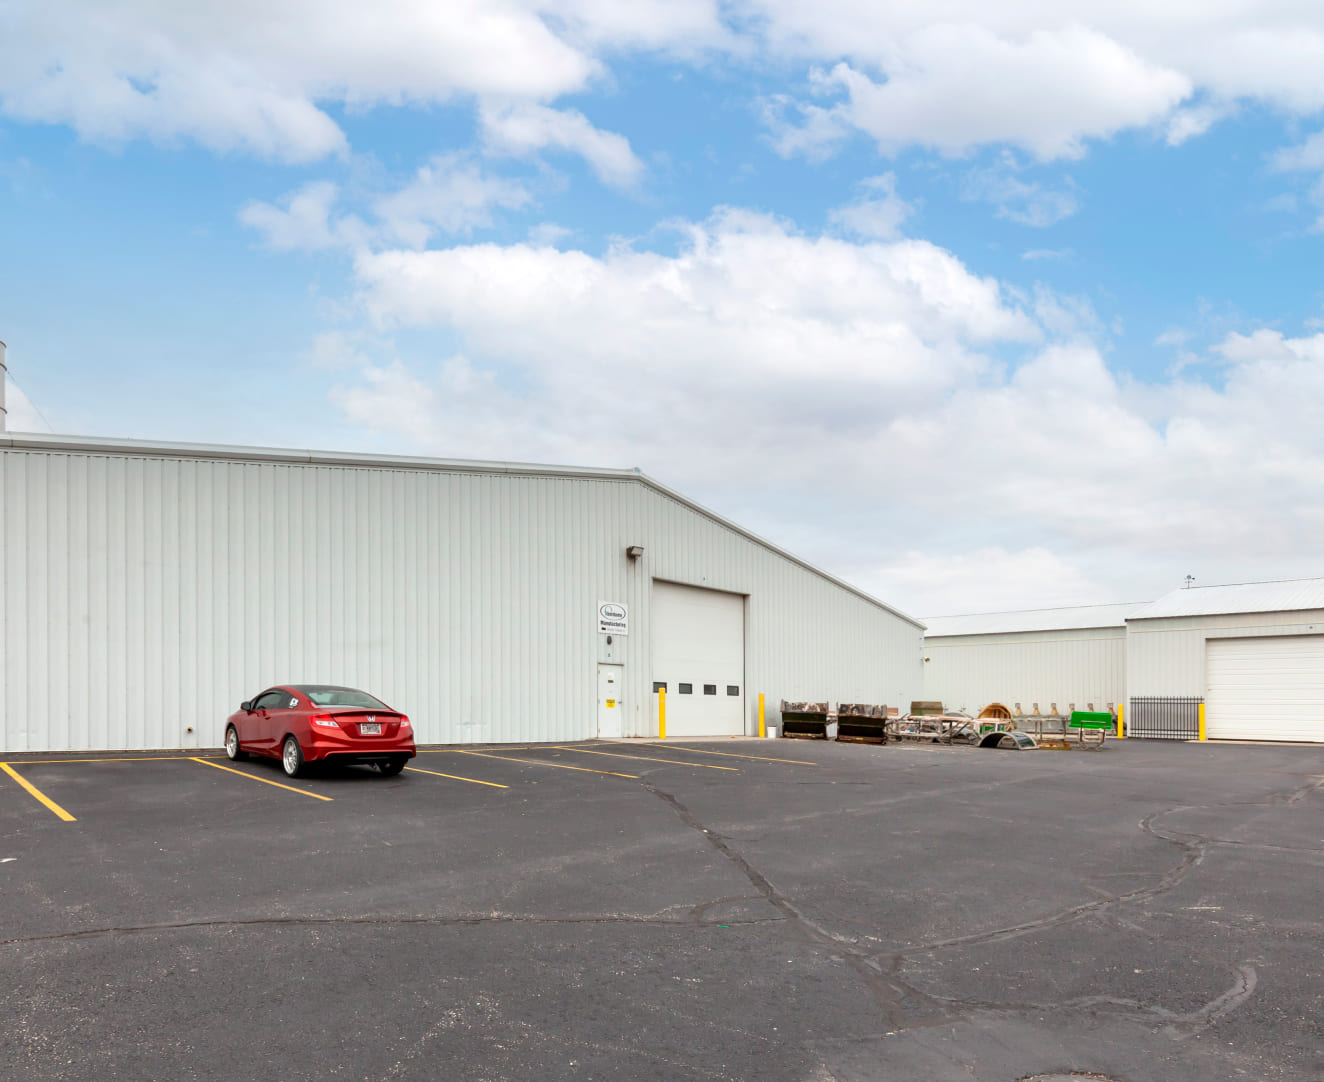 Another view of the back lot and garage doors of the industrial manufacturing building at 865 Stony Road in Lake Mills, WI.